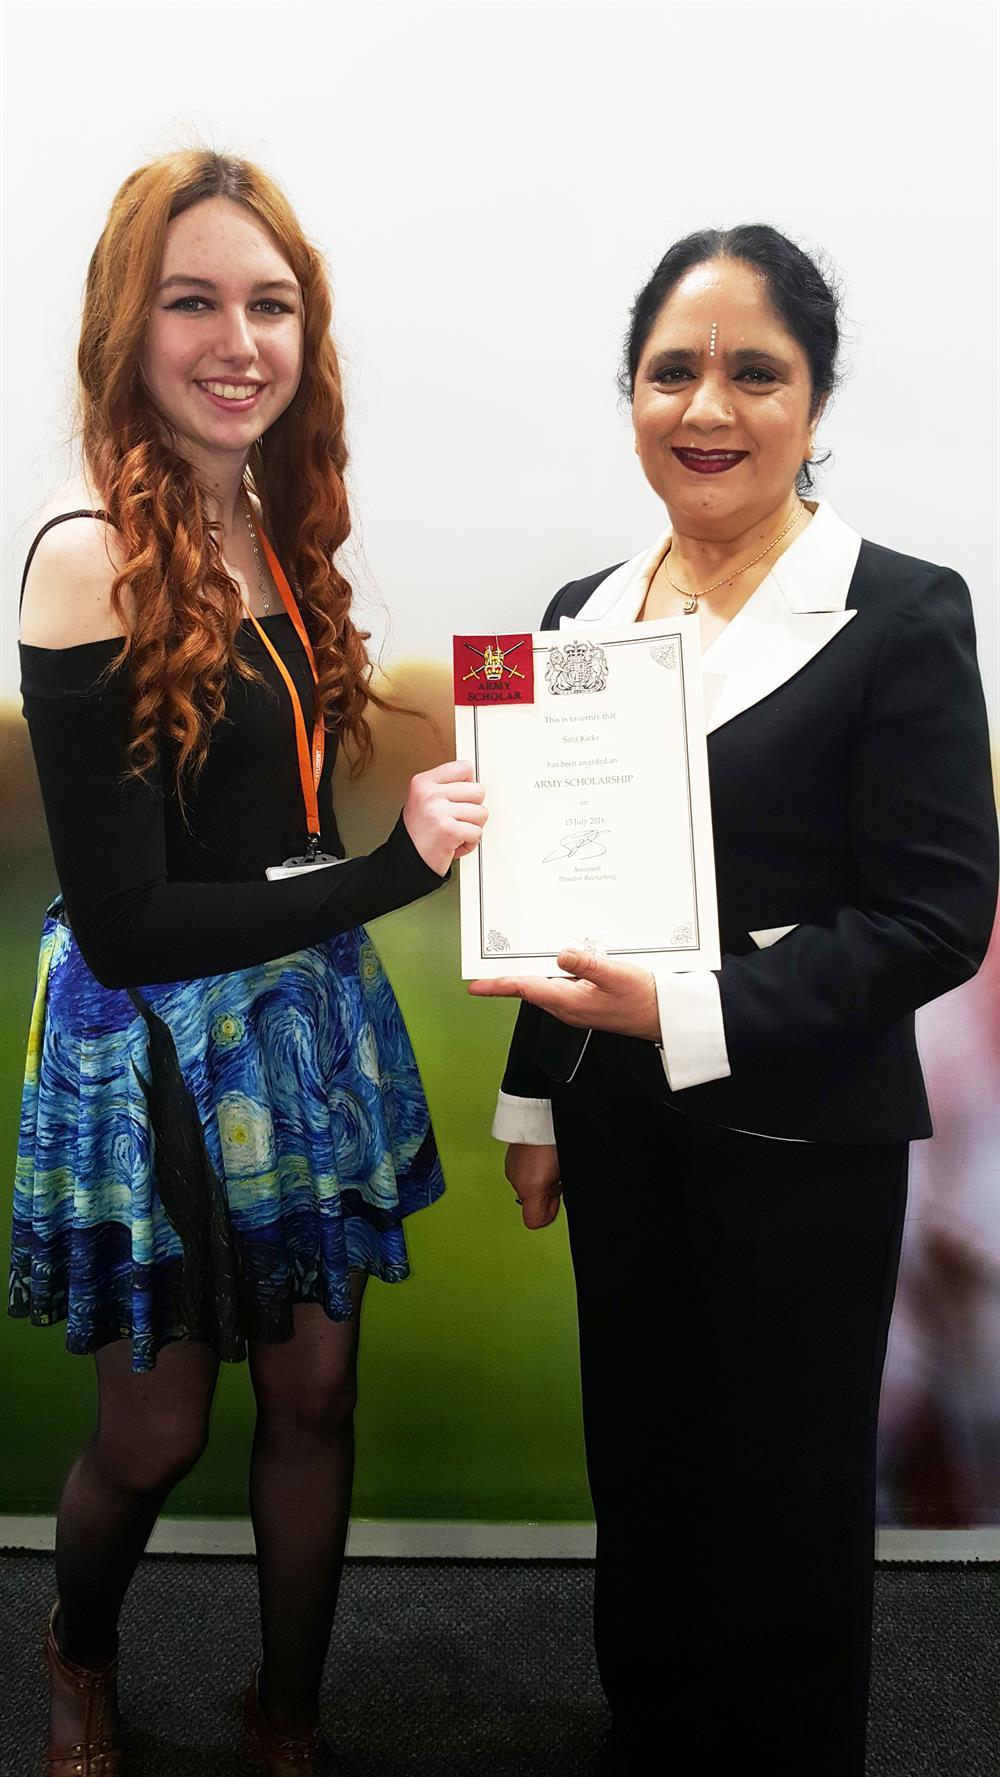 Sara was presented with her scholarship certificate for Sandhurst by Dame Asha